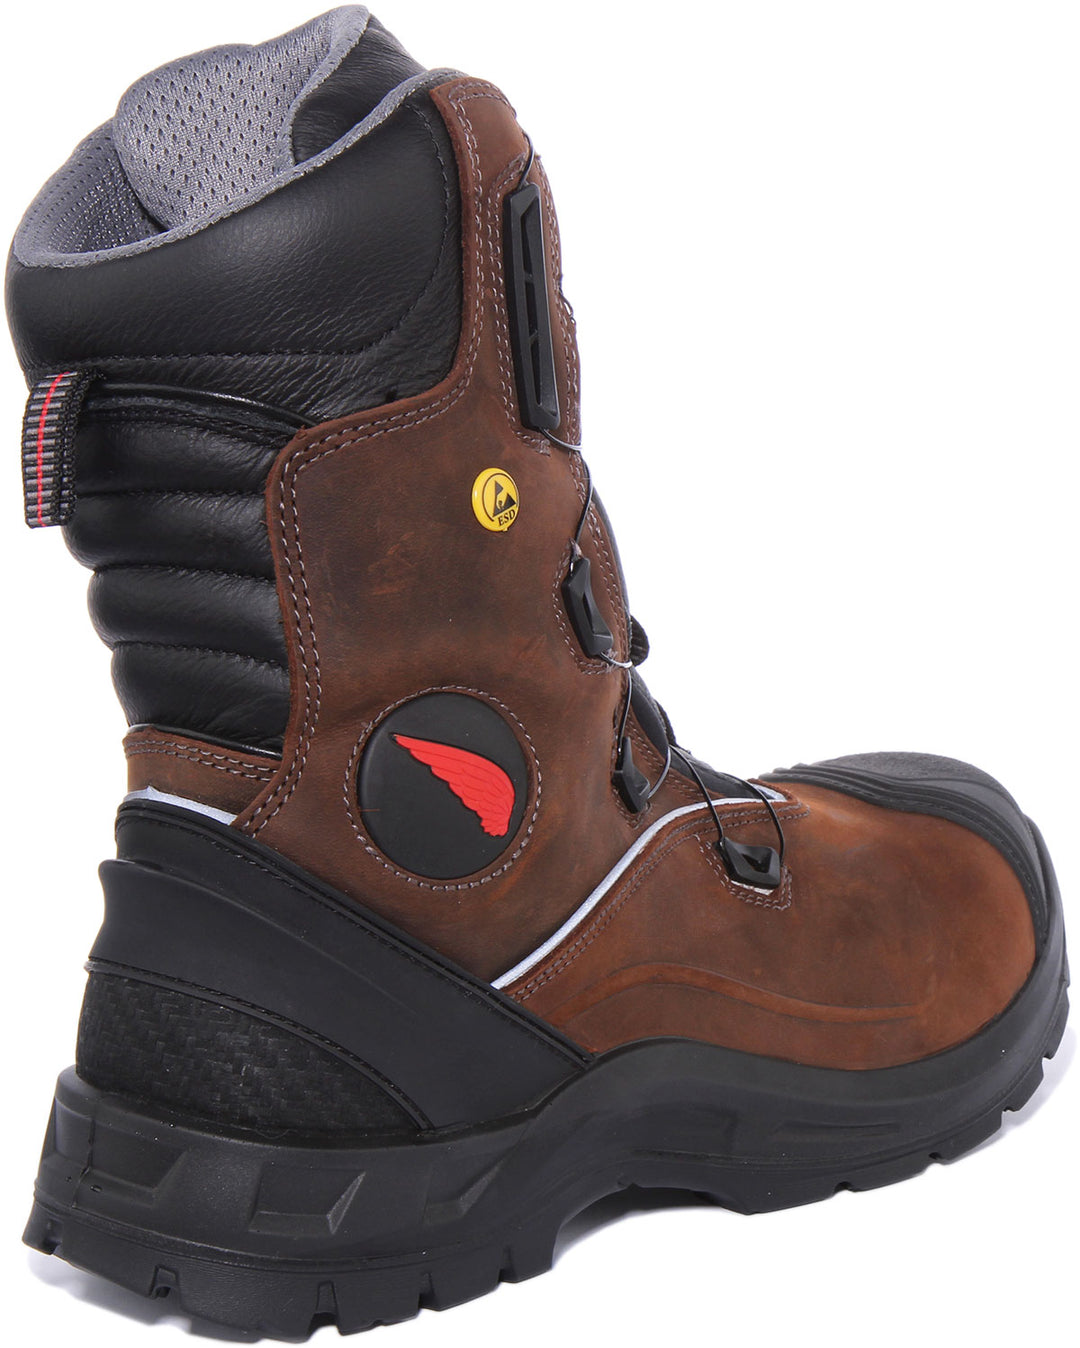 RED WING: 3239 PETROKING 8-INCH SAFETY BOOT